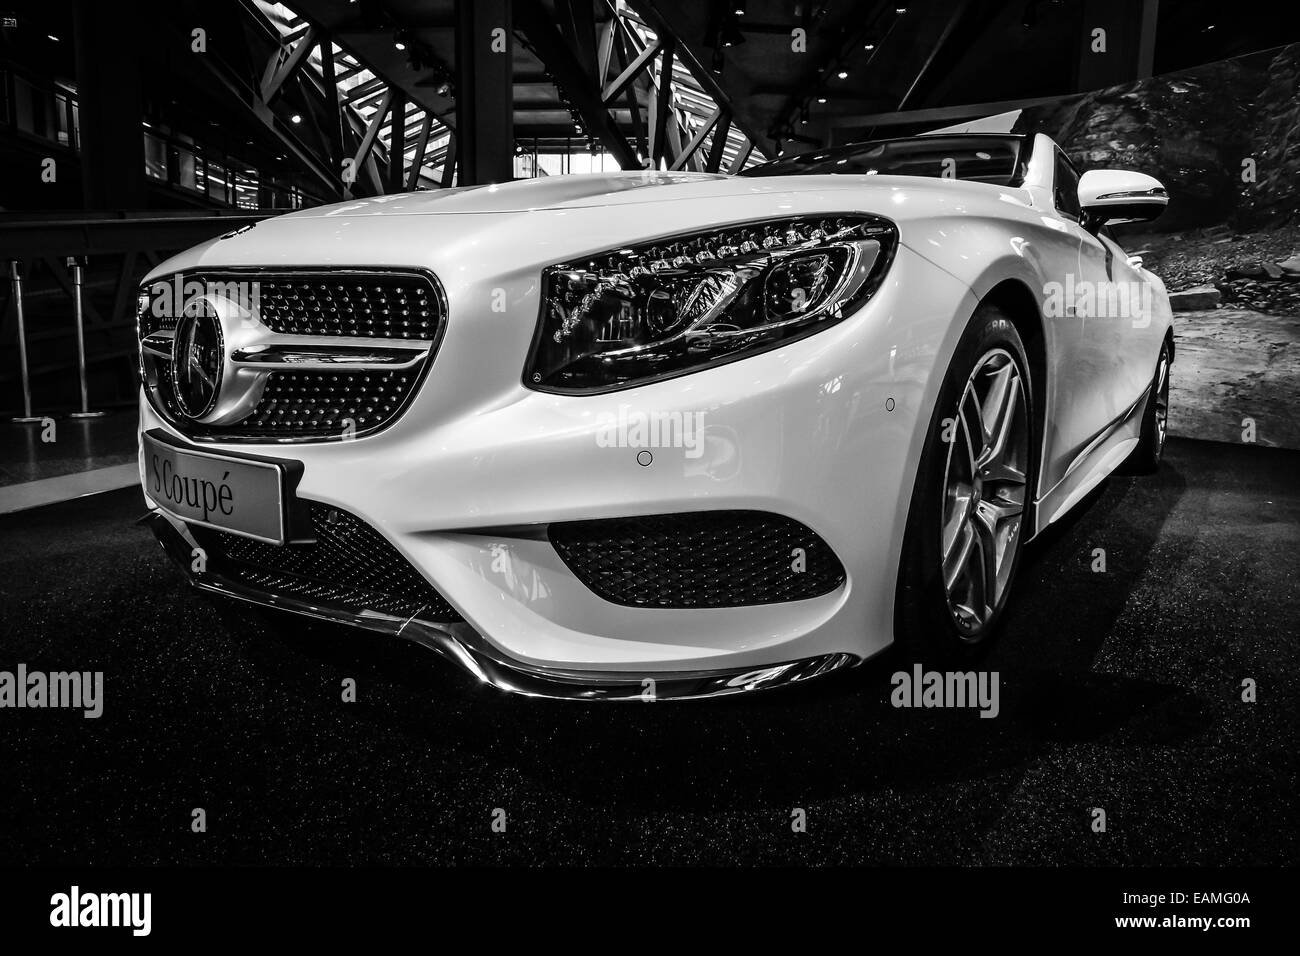 BERLIN - JULY 18, 2014: Showroom. Mercedes-Benz S 500 Coupe (C217). The newest luxury car (since 2014). Black and white. Stock Photo